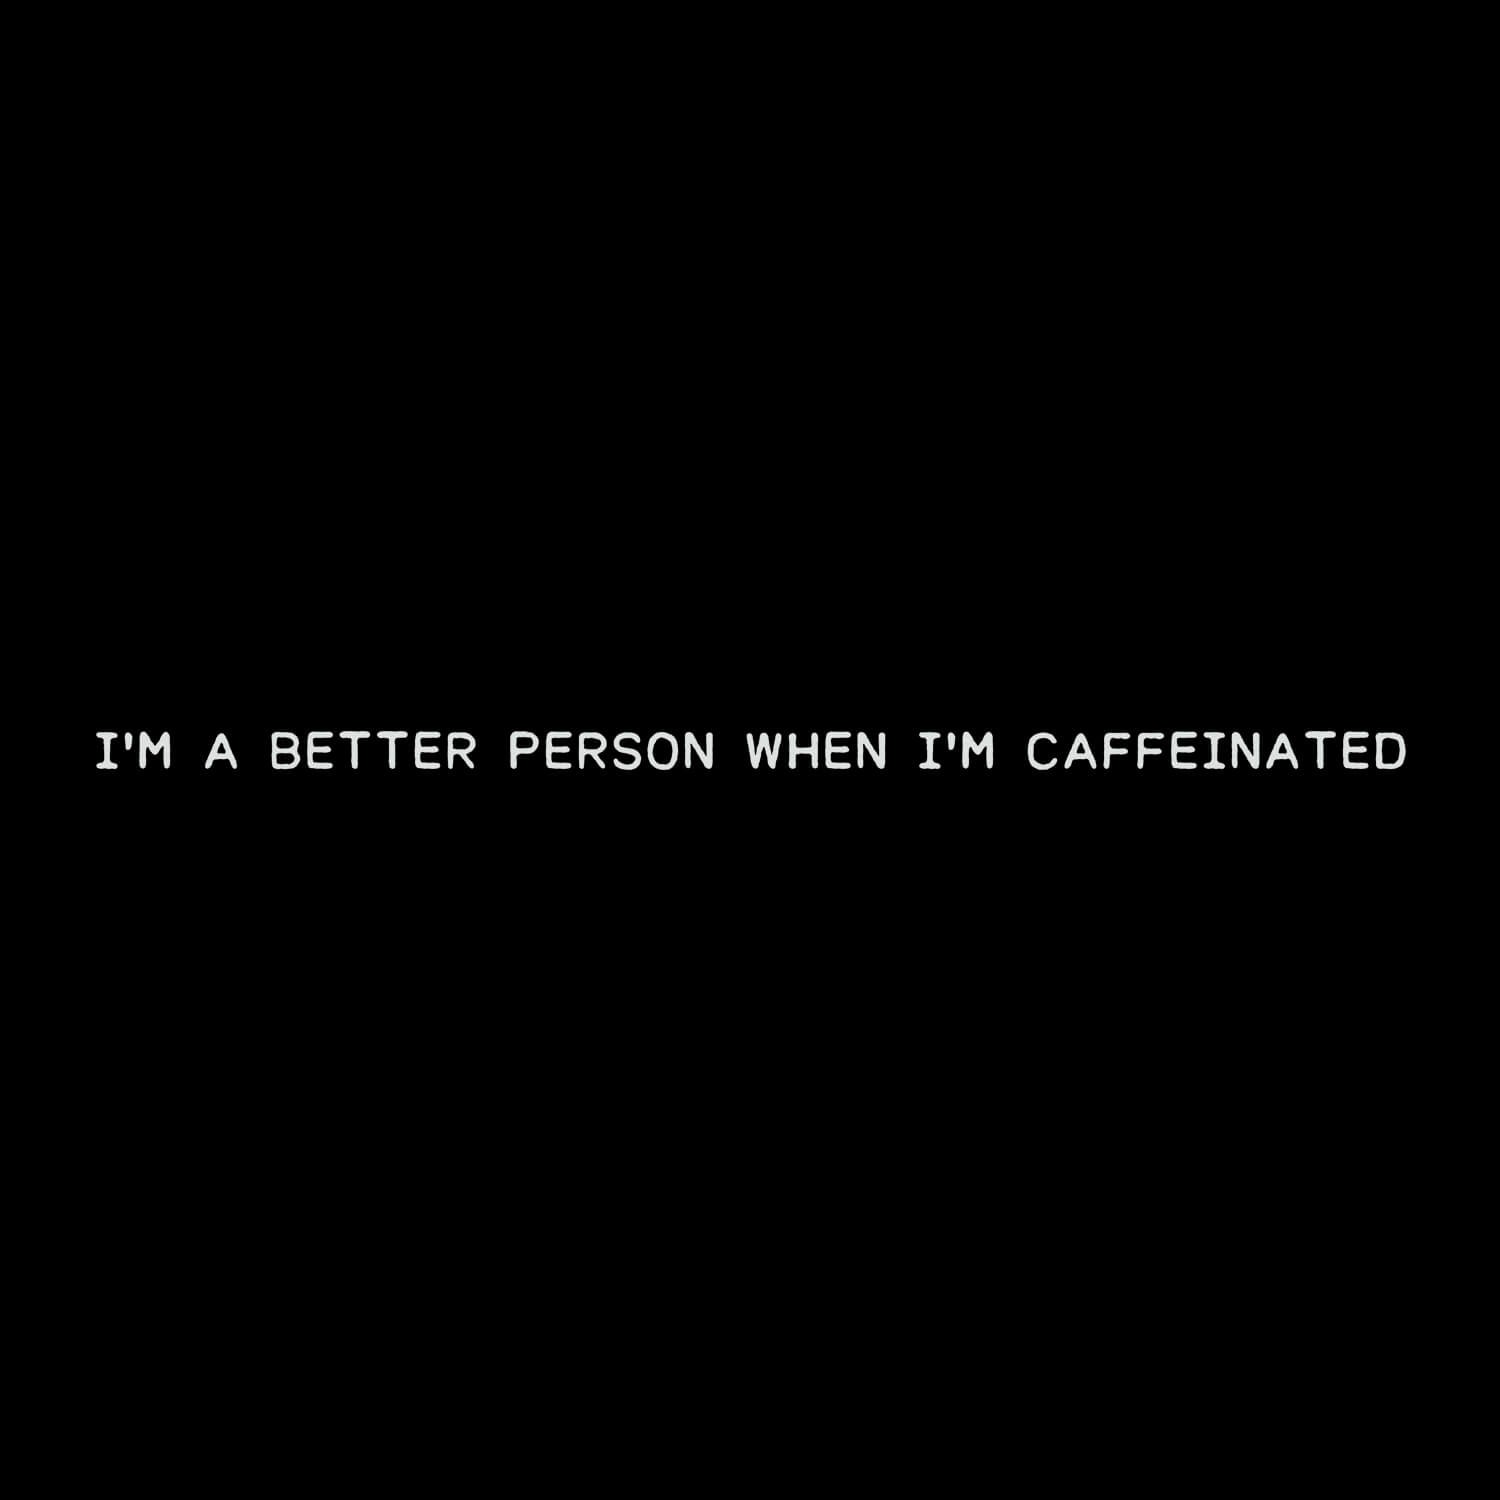 I'm A Better Person When I'm Caffeinated - Women's Tee